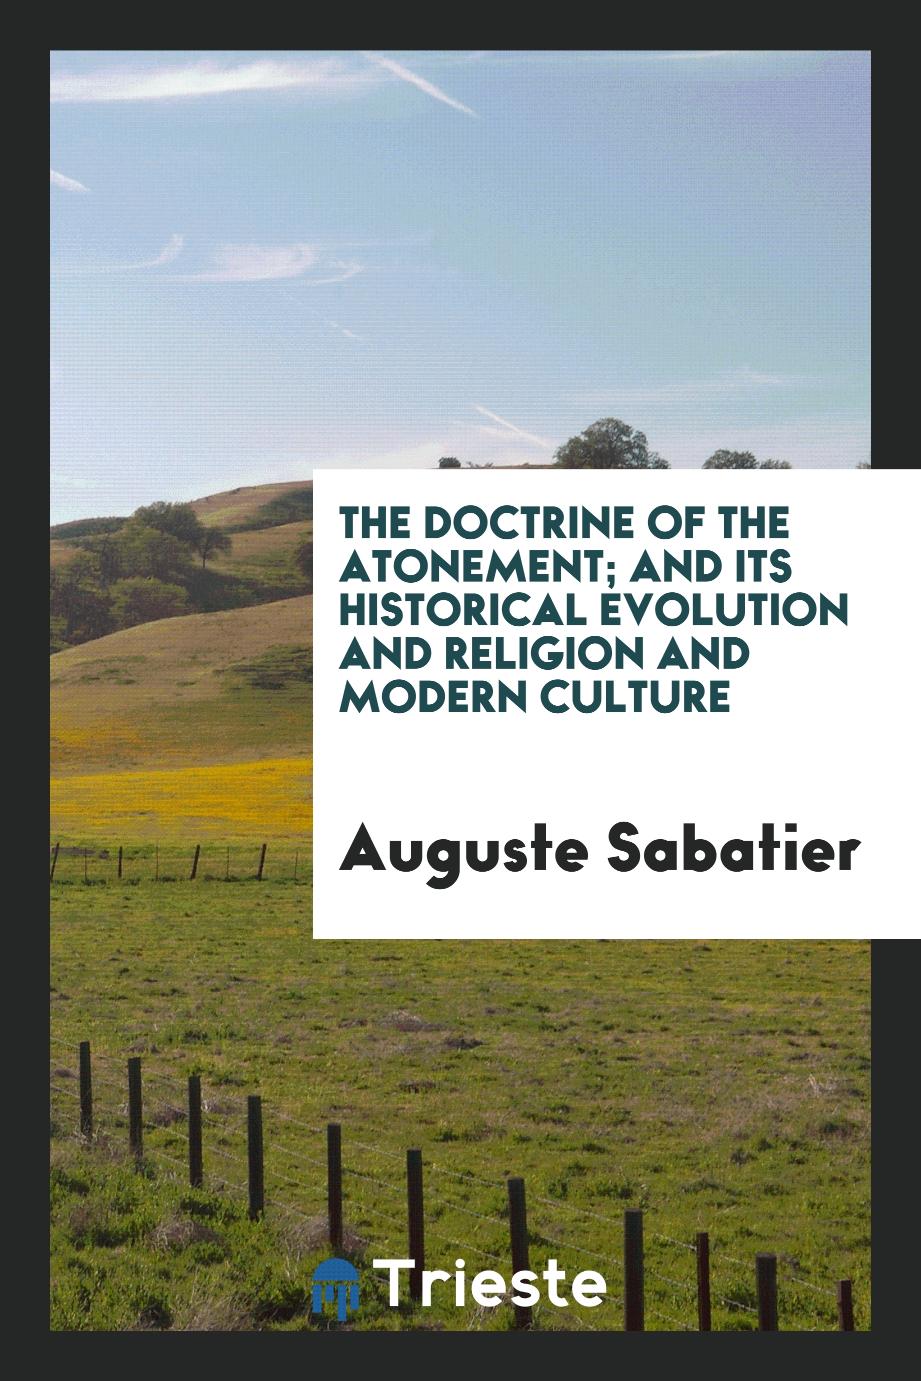 Auguste Sabatier - The doctrine of the atonement; and its historical evolution and religion and modern culture